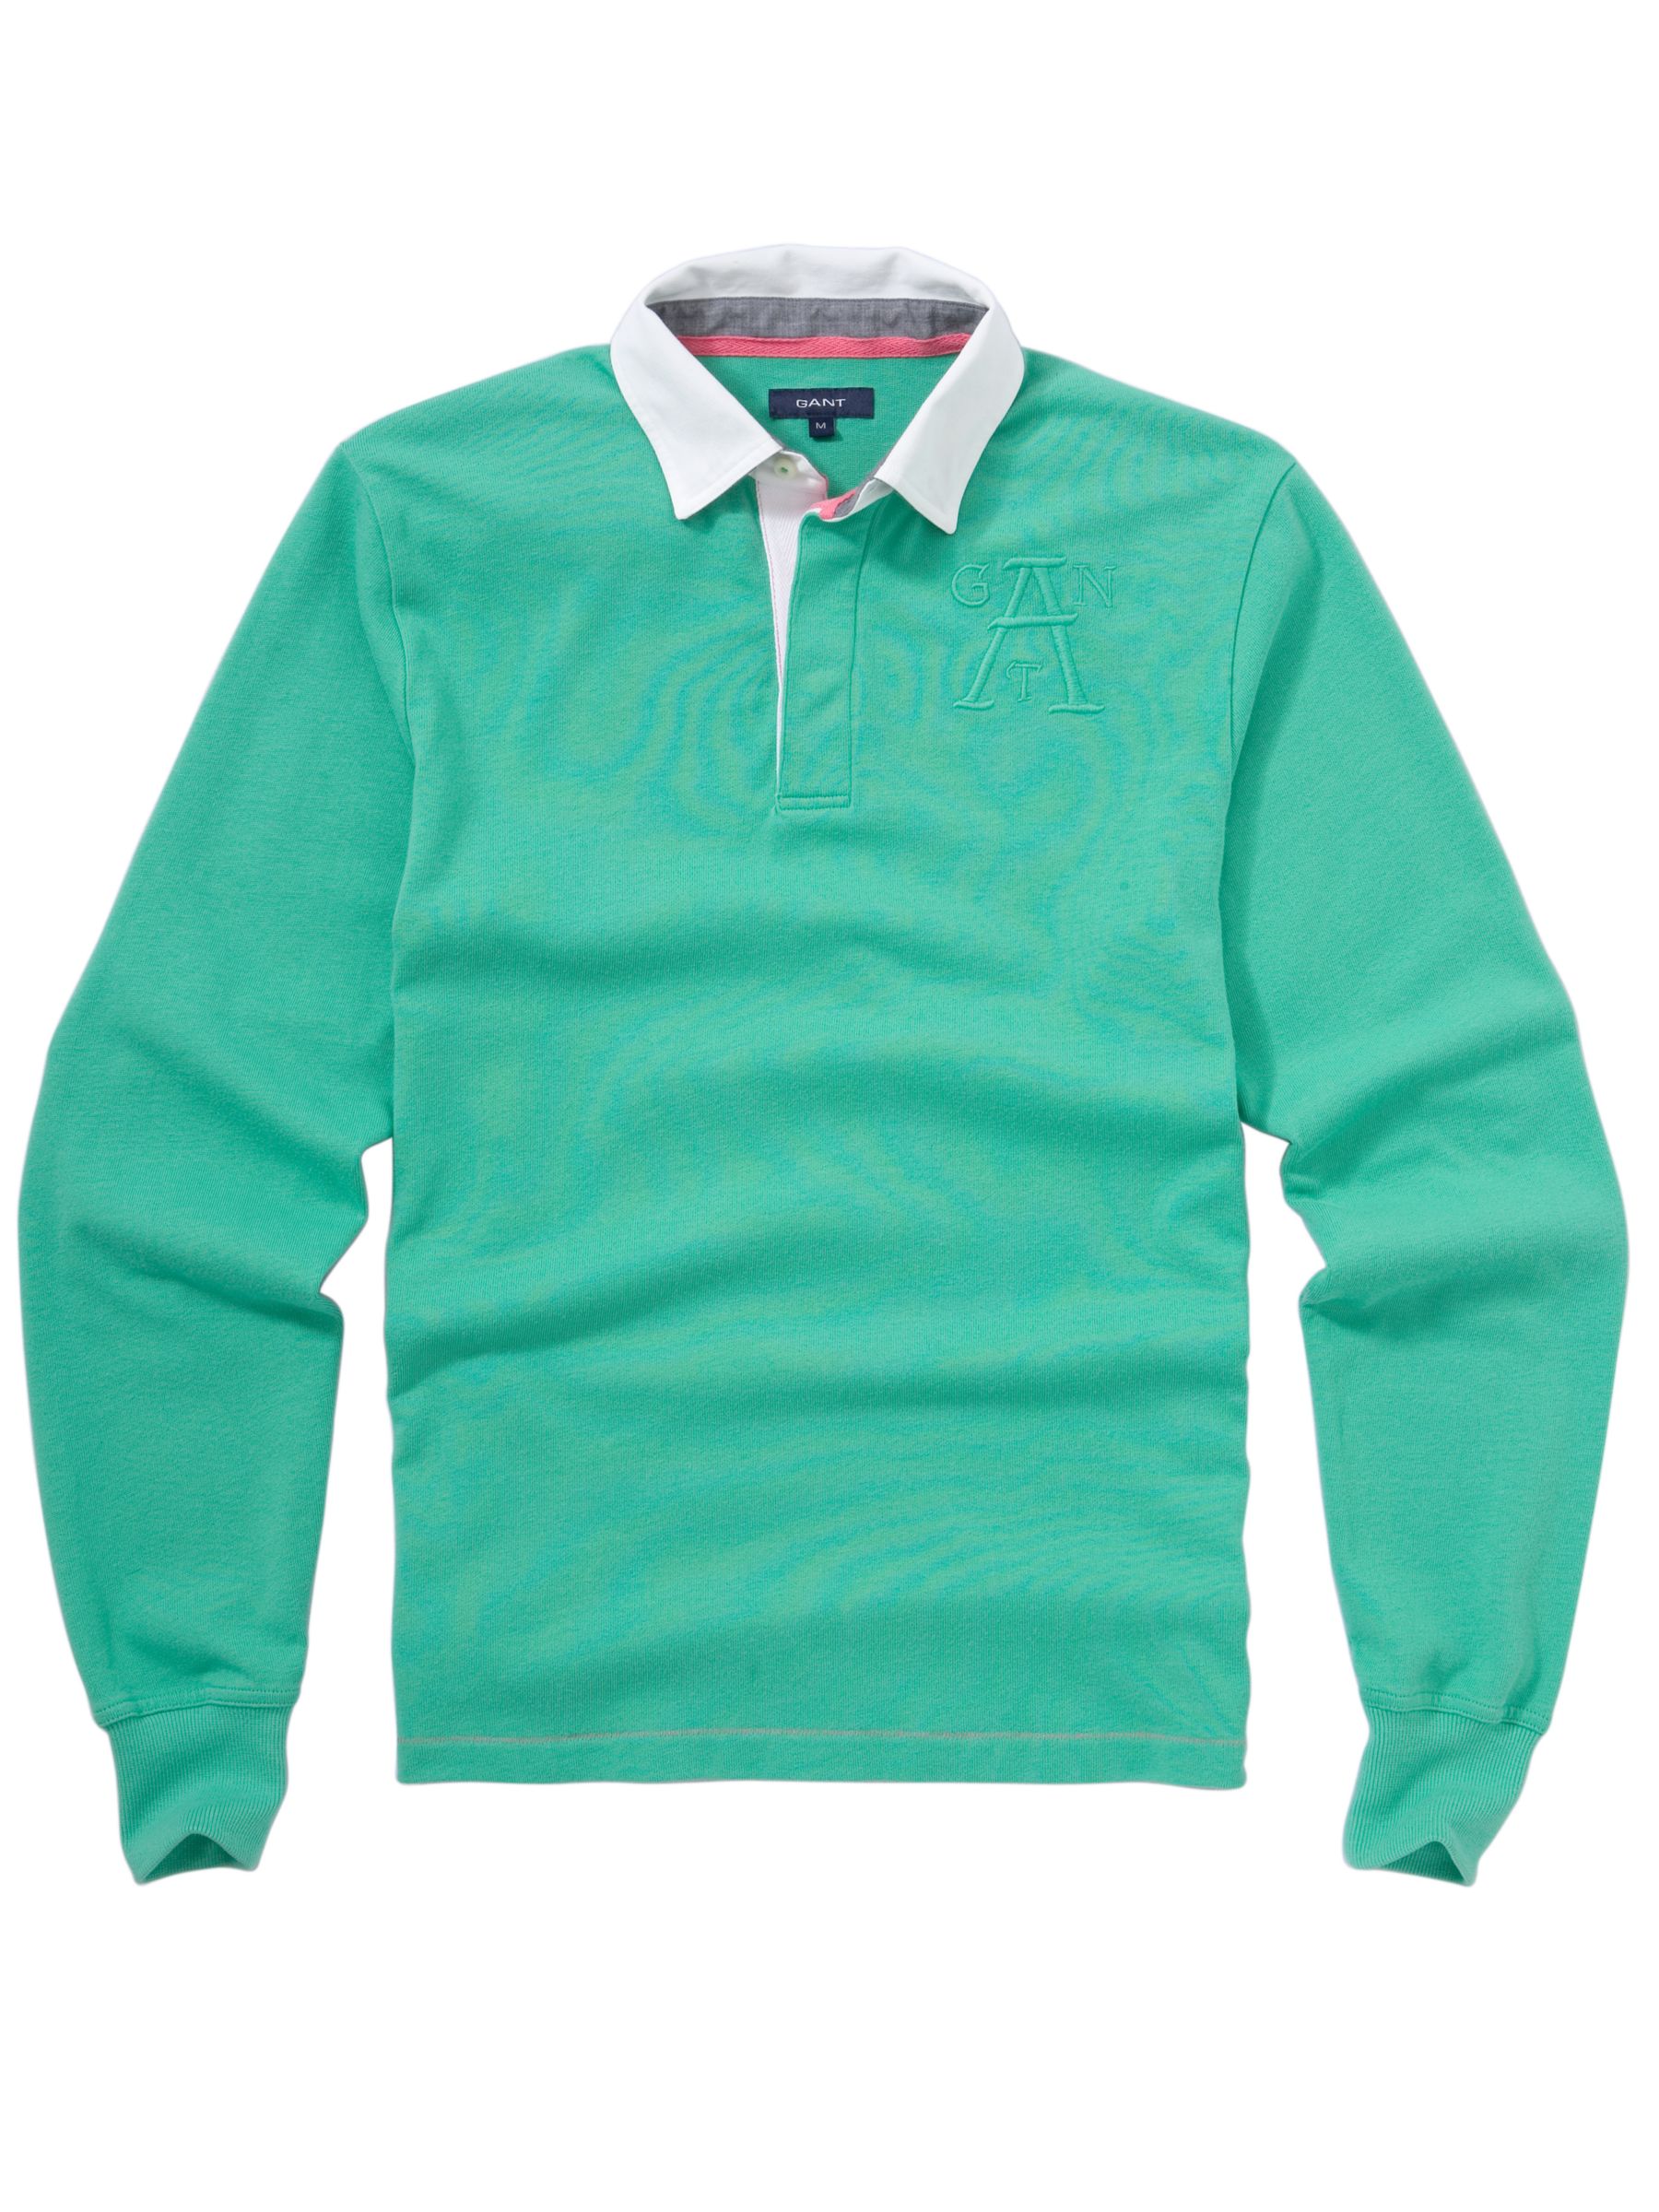 Heavy Rugby Shirt, Green